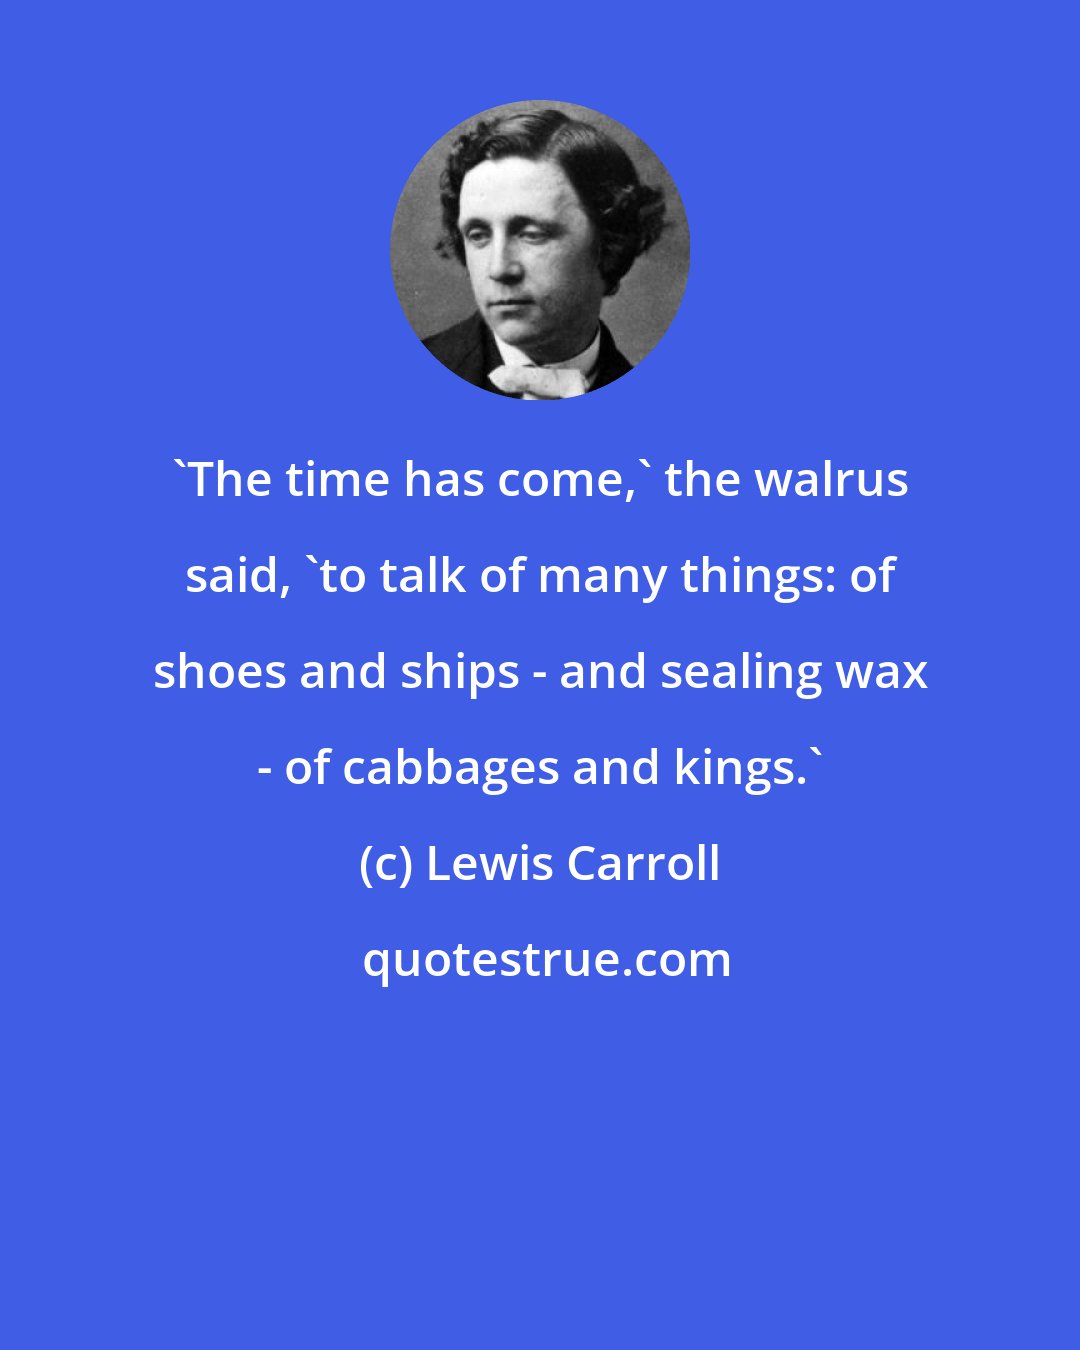 Lewis Carroll: 'The time has come,' the walrus said, 'to talk of many things: of shoes and ships - and sealing wax - of cabbages and kings.'